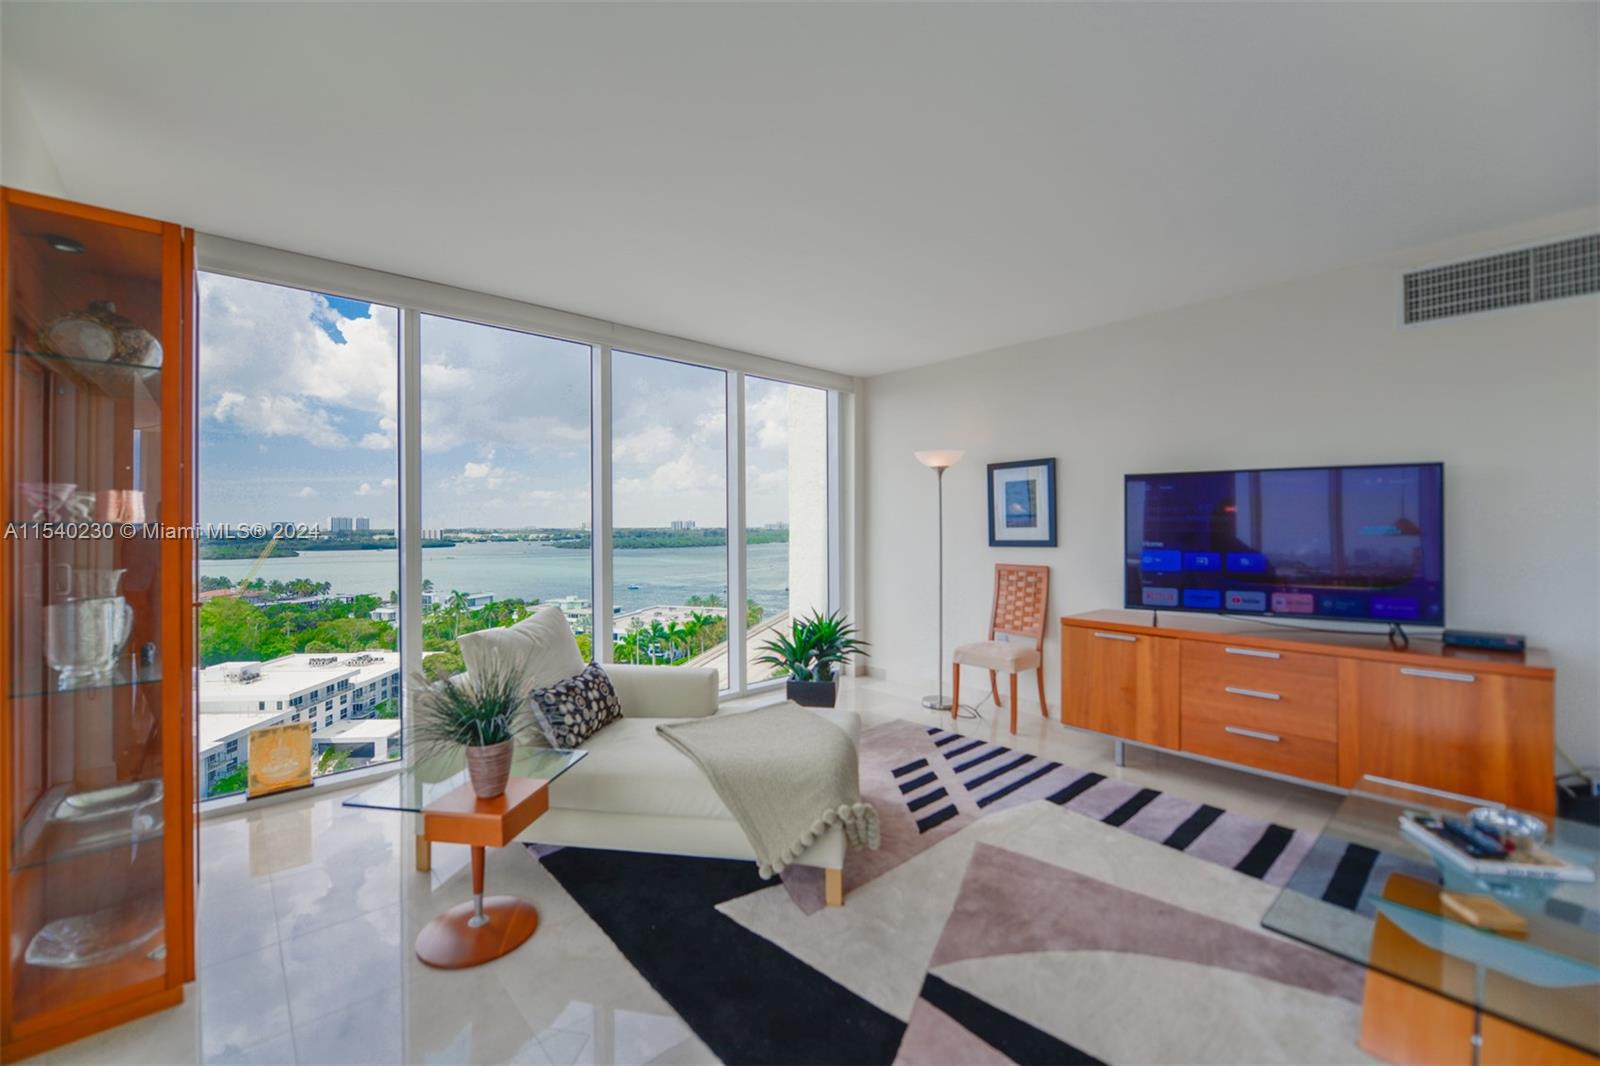 Property: 10275 Collins Ave 1222,Bal Harbour, FL